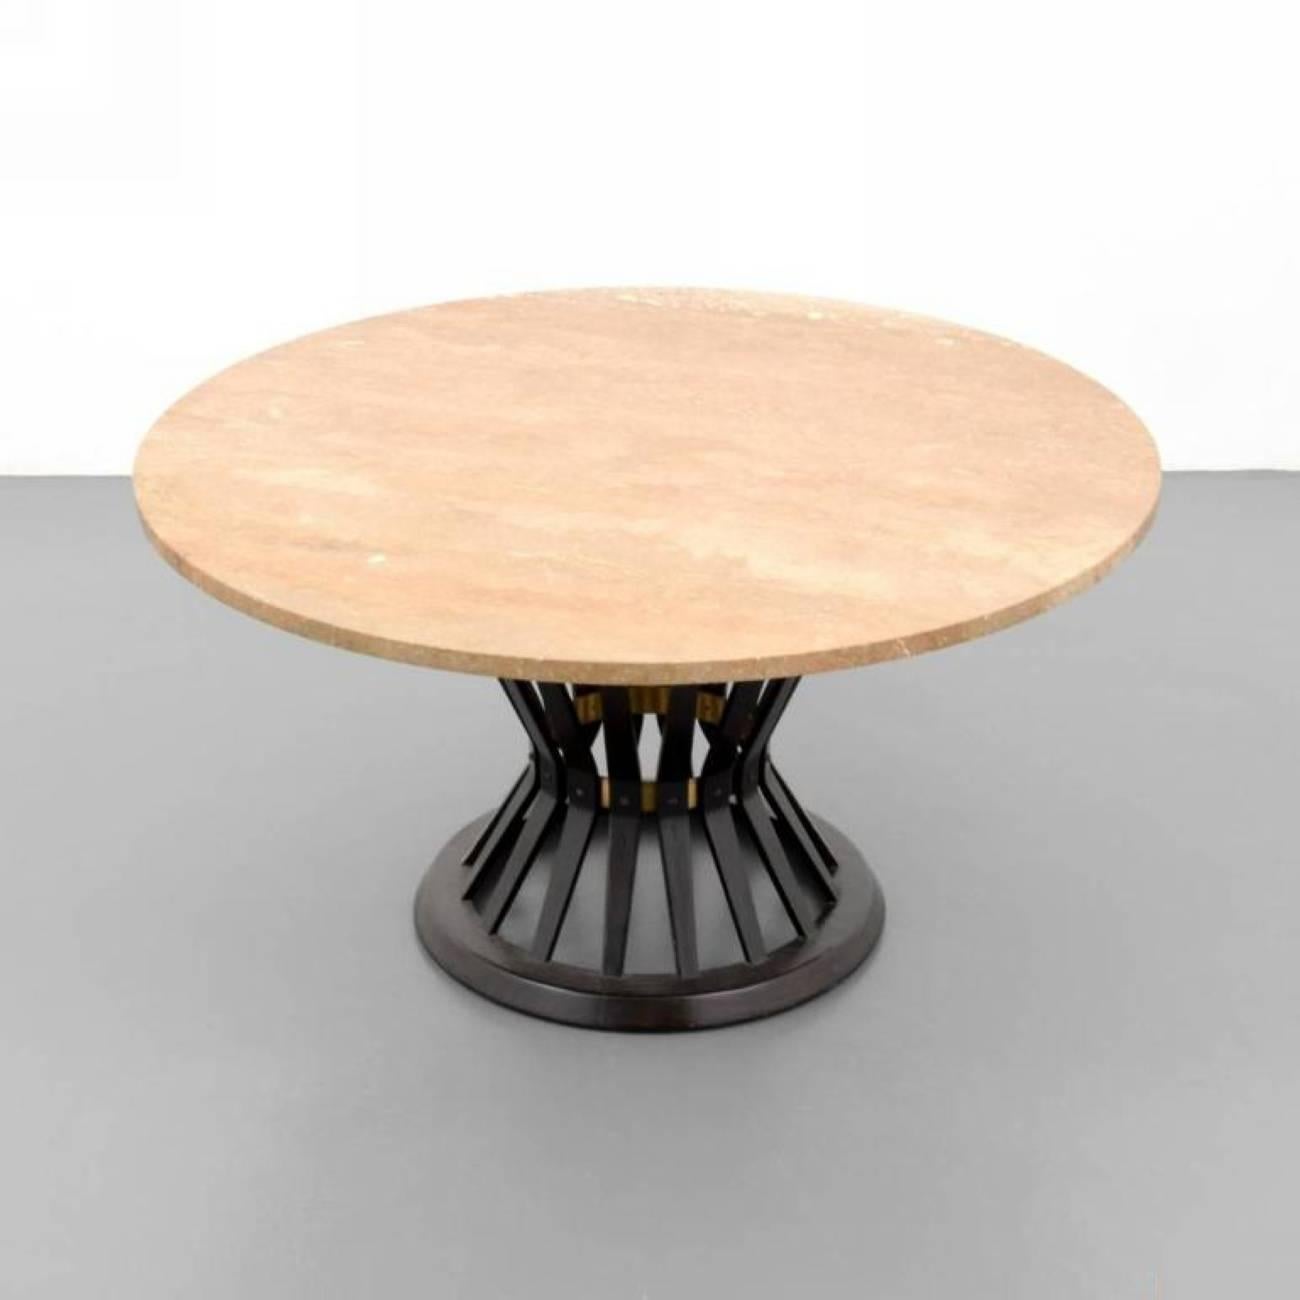 Coffee table with marble top by Edward Wormley for Dunbar. Table is model #5574. Reference: Dunbar- Fine Furniture of the 1950s, Leslie Piña, pgs. 96, 97, 192.

Markings: Dunbar label.

Edward Wormley's furniture designs utilized quality materials